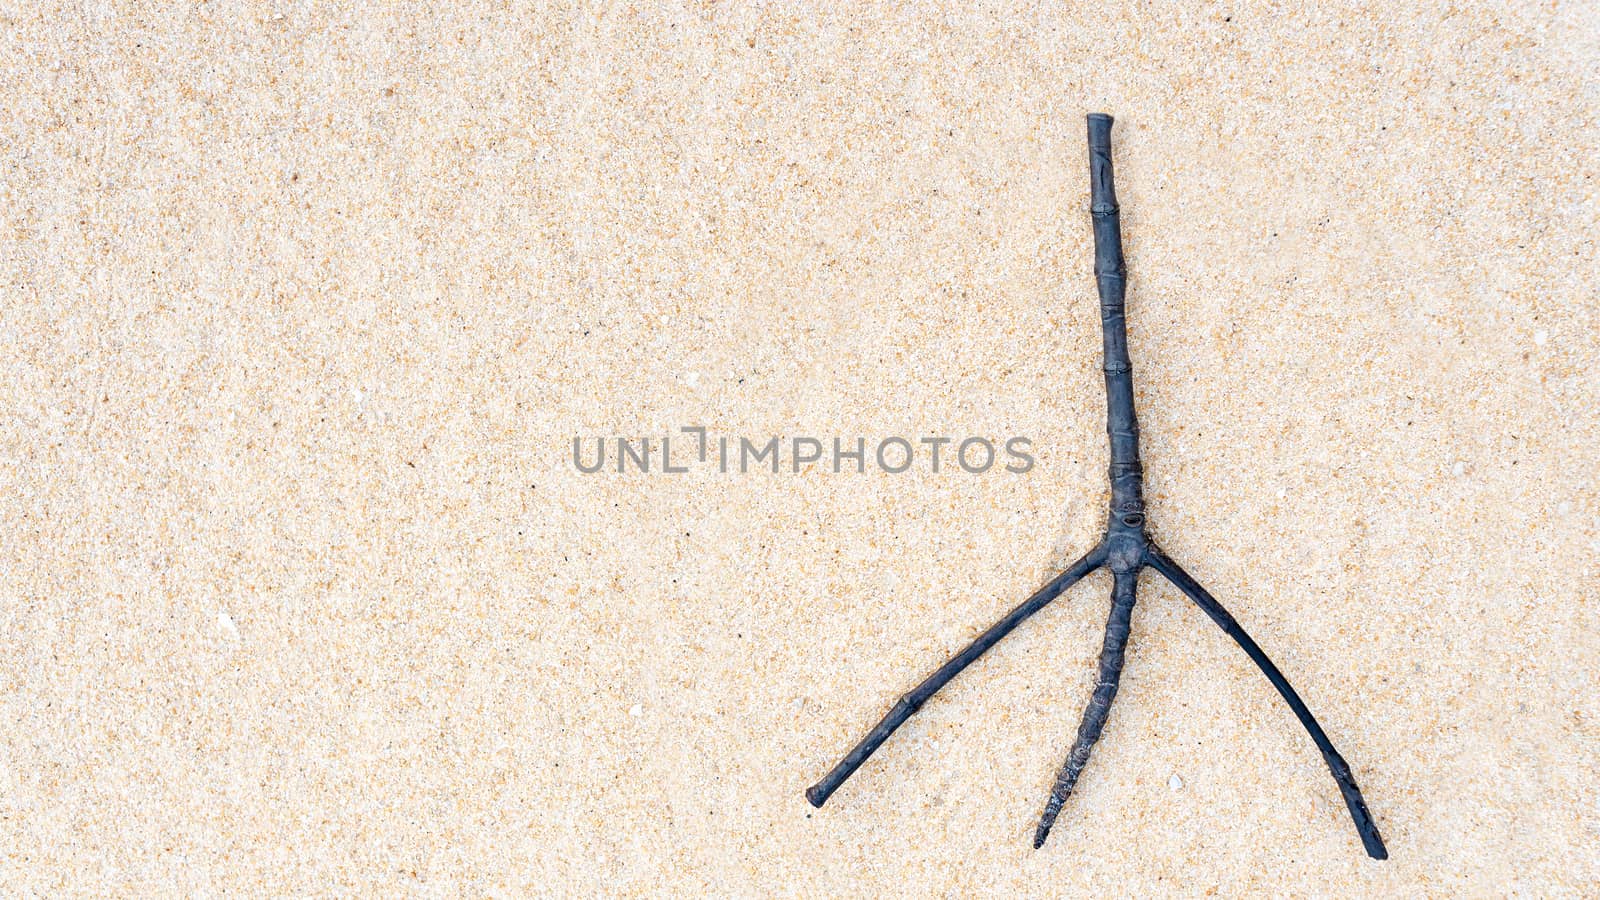 Twig on sand by hkt83000